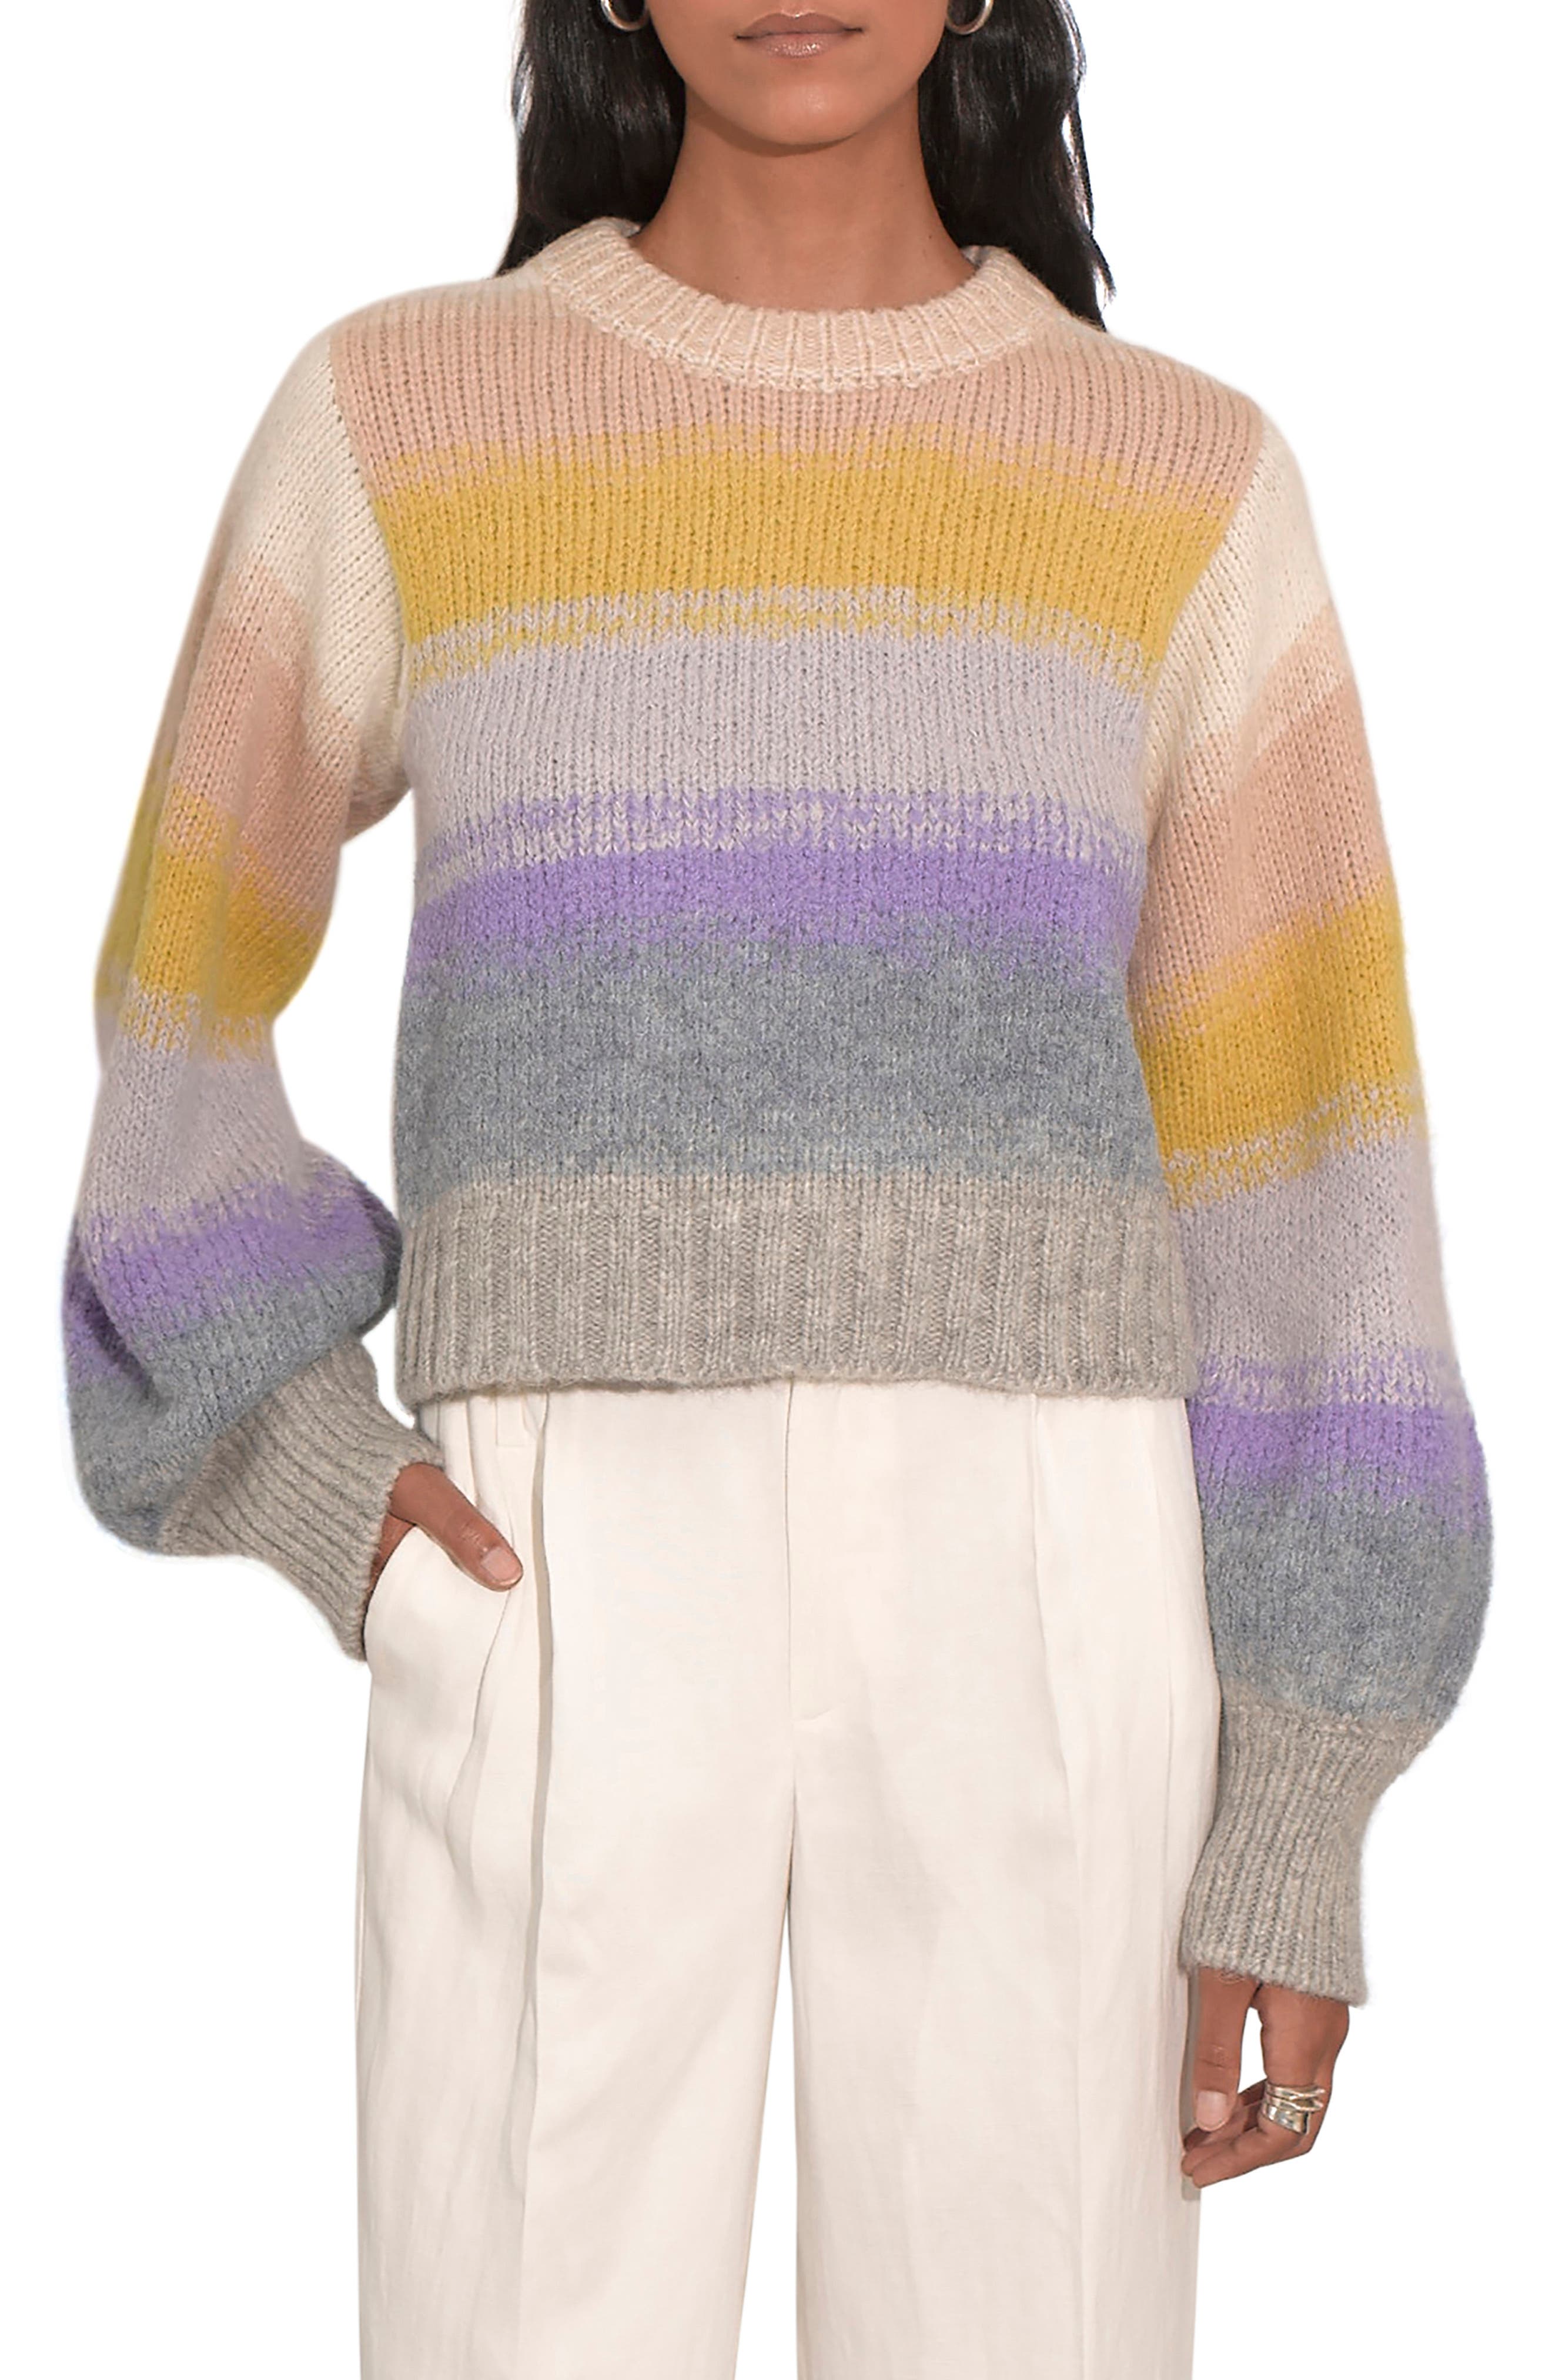 Eleven Six Joy Alpaca Blend Sweater in Pink Multi Color at Nordstrom